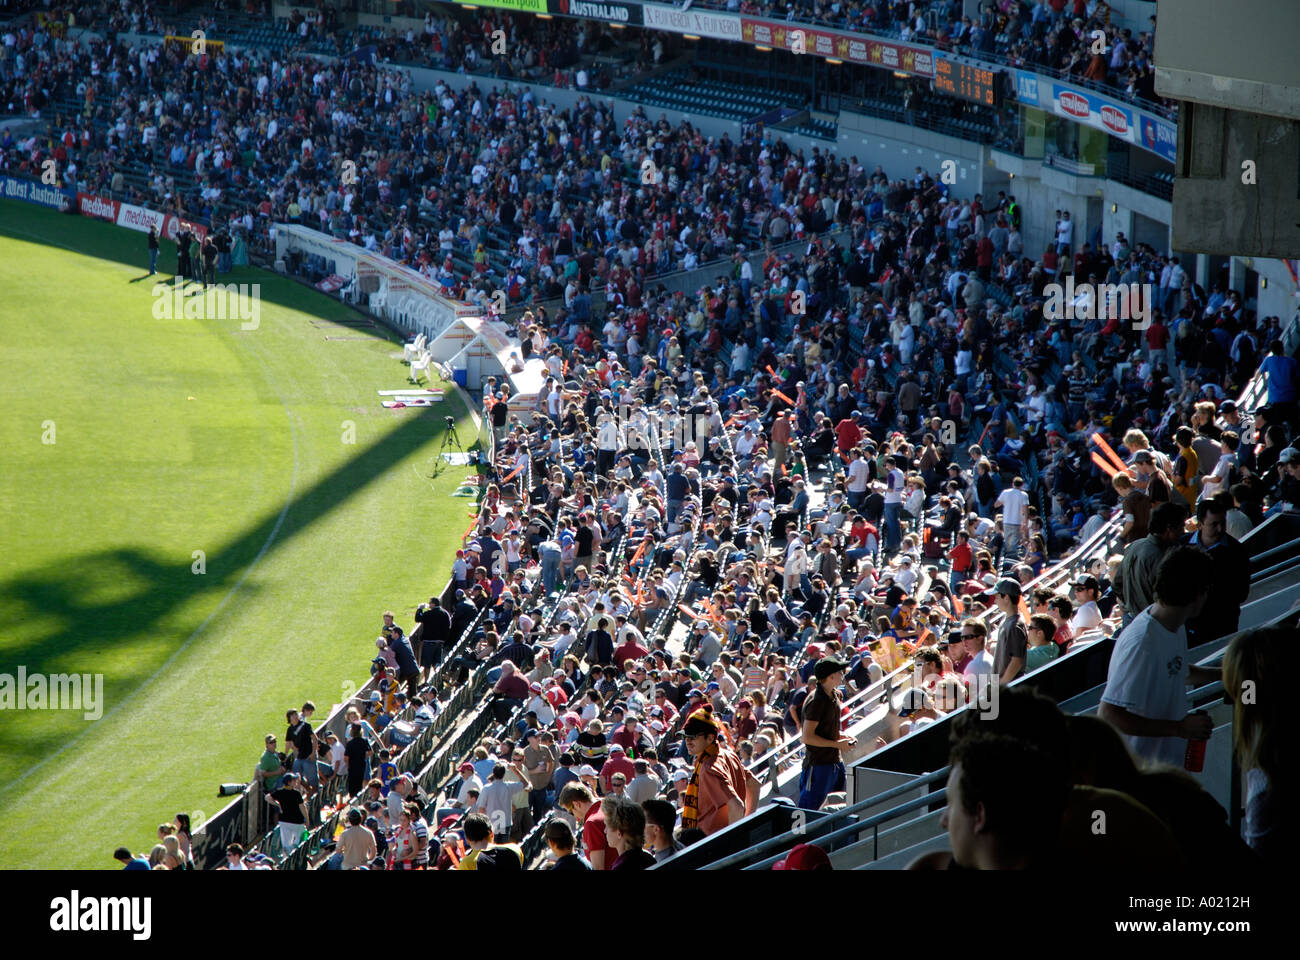 view of crowd at Australian Rules Football match at the now Stock Photo -  Alamy